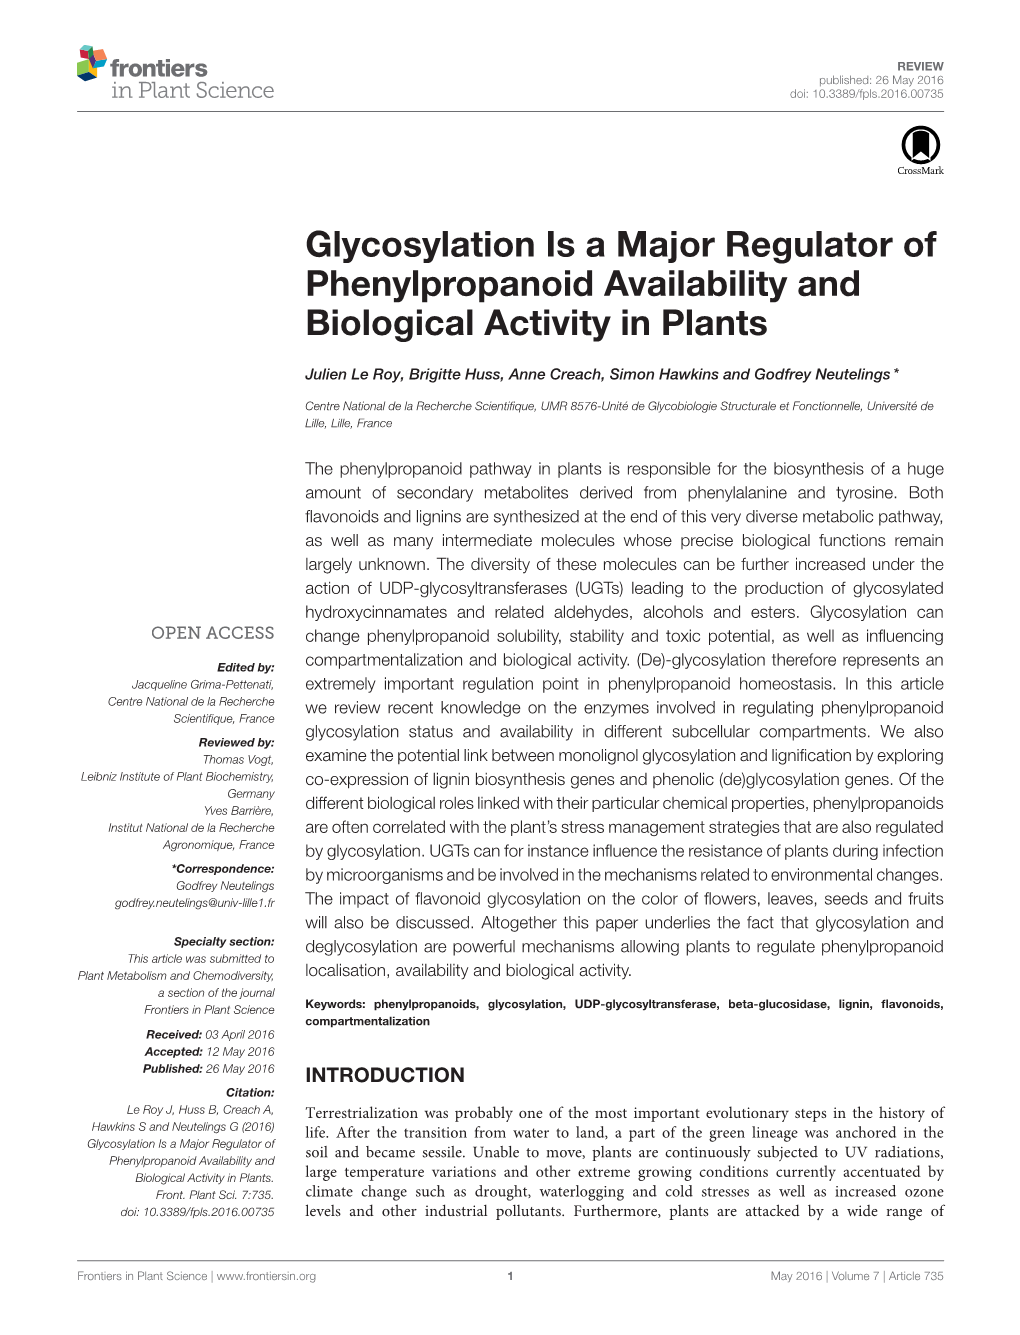 Glycosylation Is a Major Regulator of Phenylpropanoid Availability and Biological Activity in Plants